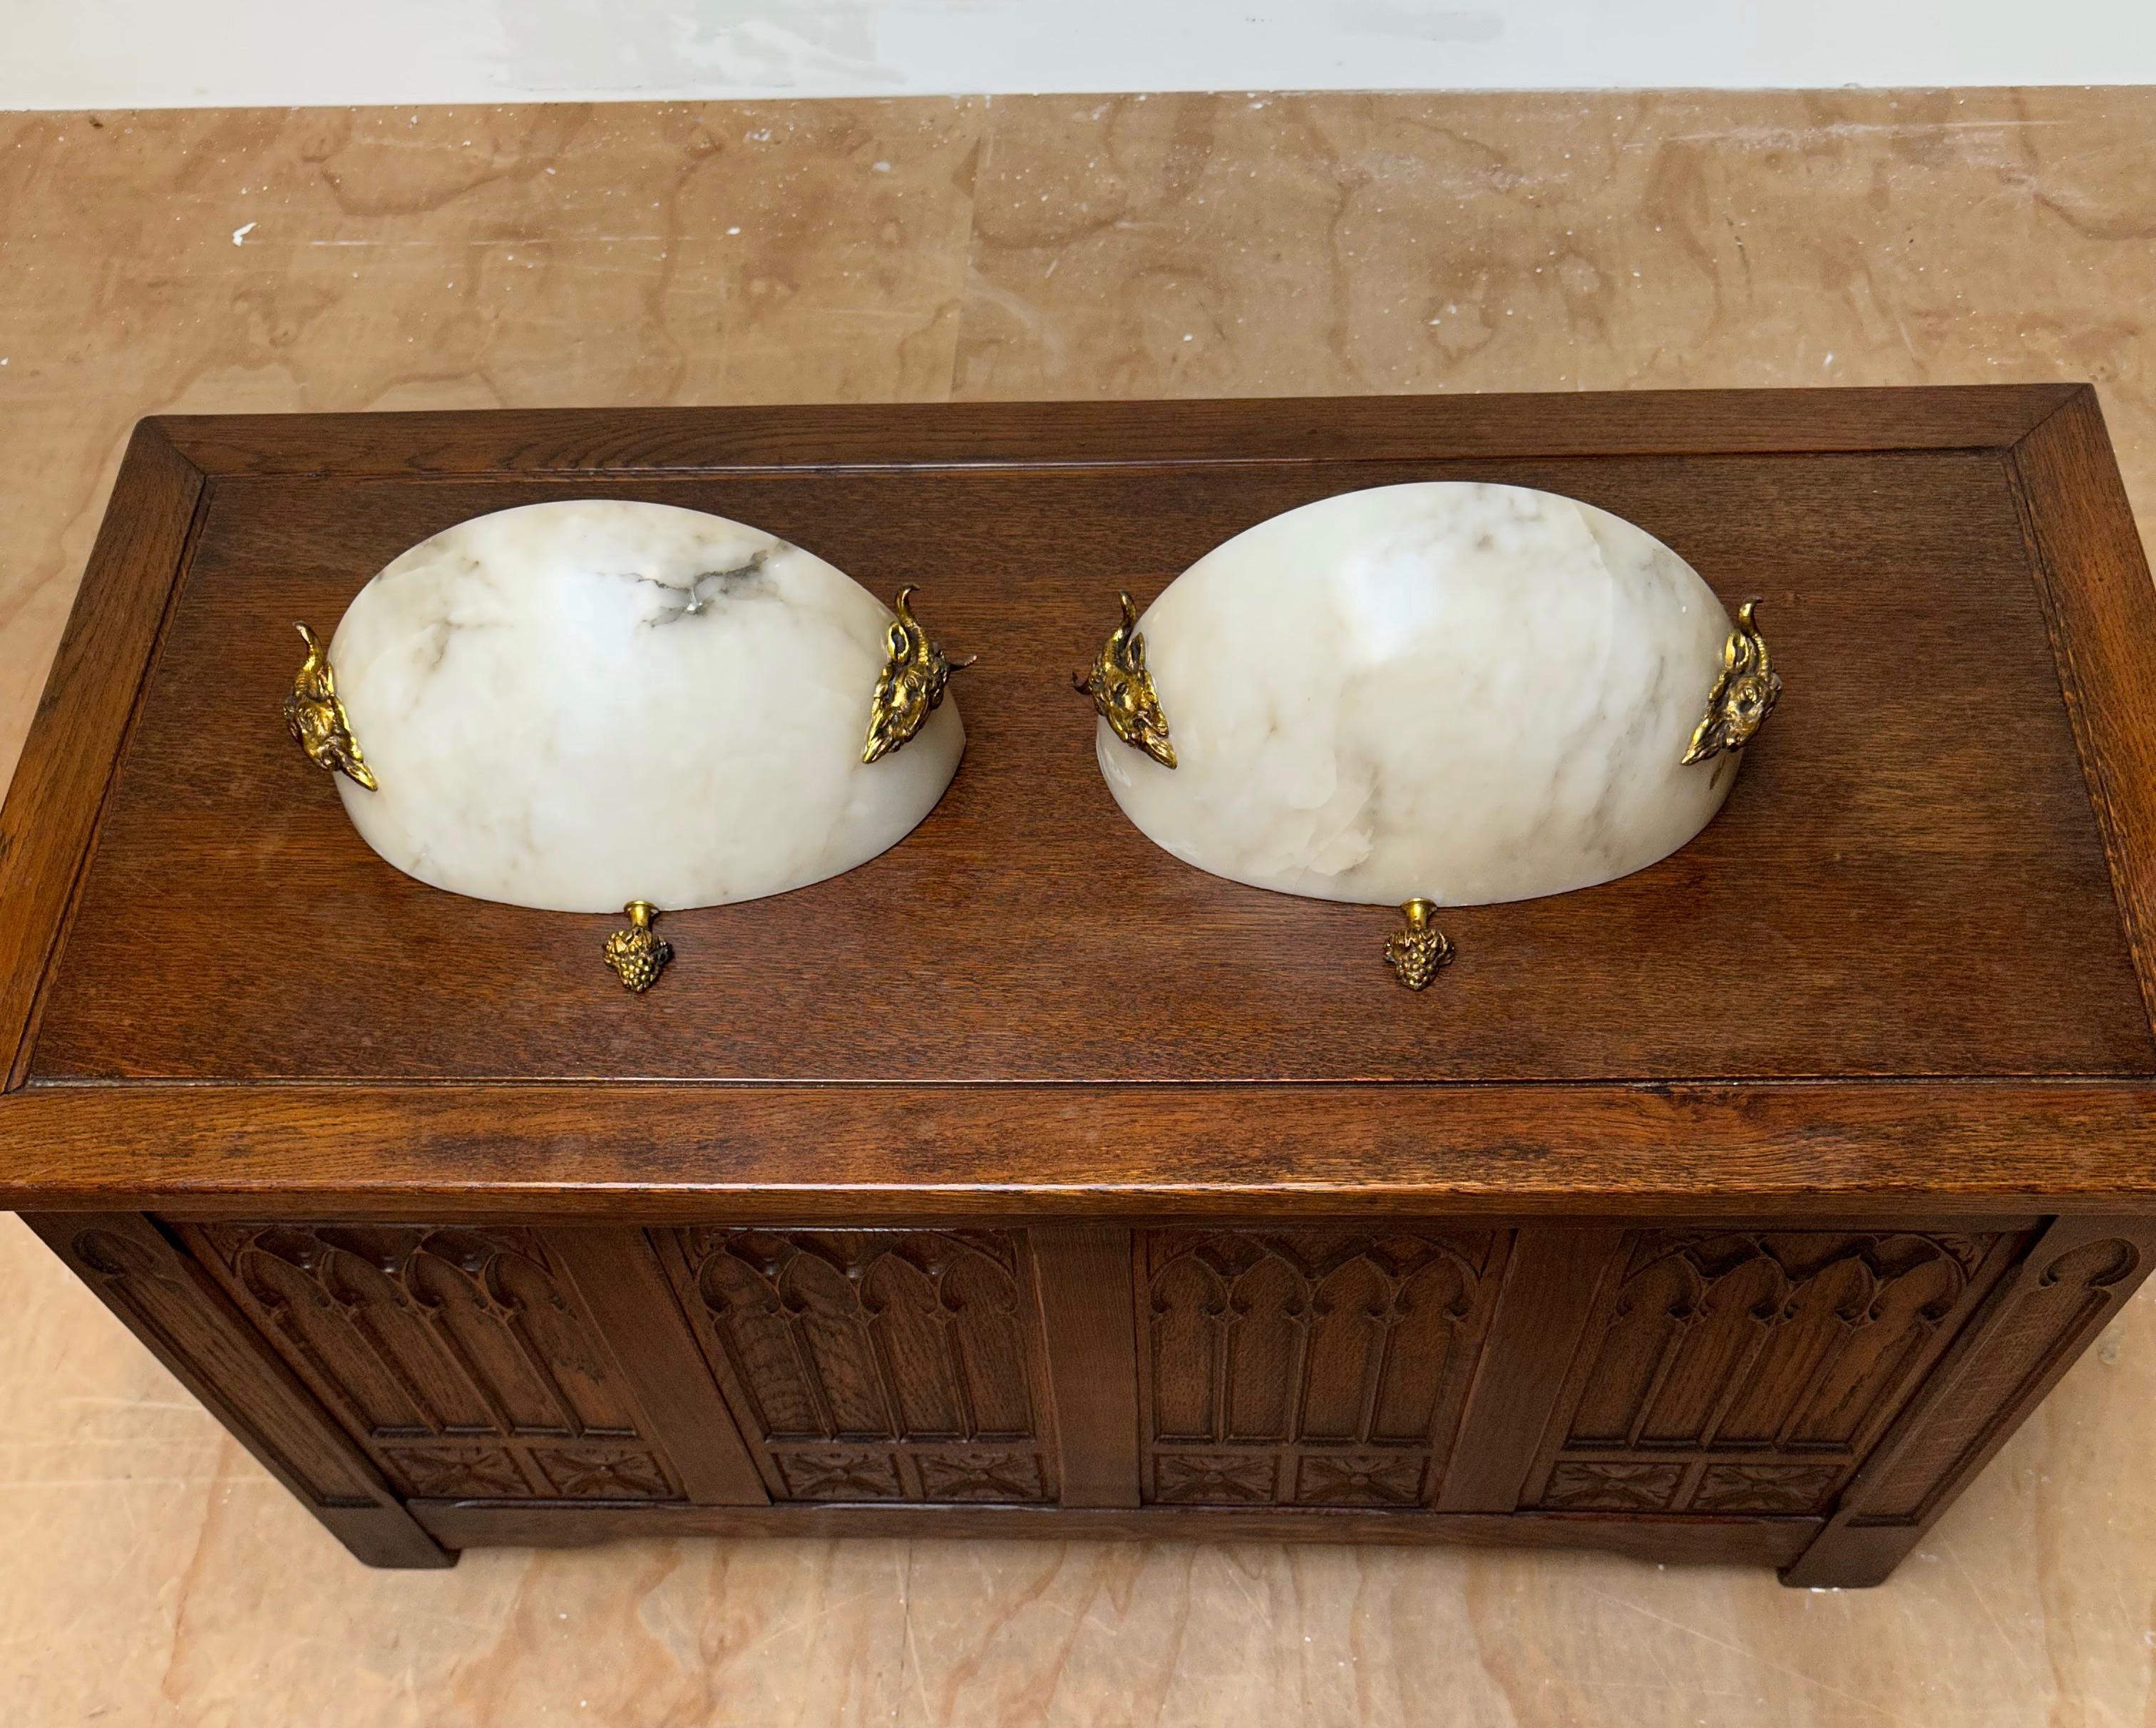 Rare, stylish and great quality pair of antique alabaster wall sconces.

This beautiful quality and impressive pair of gilt bronze and alabaster sconces truly is a rare find. We have sold many antique alabaster pendant lights, but as far as we can